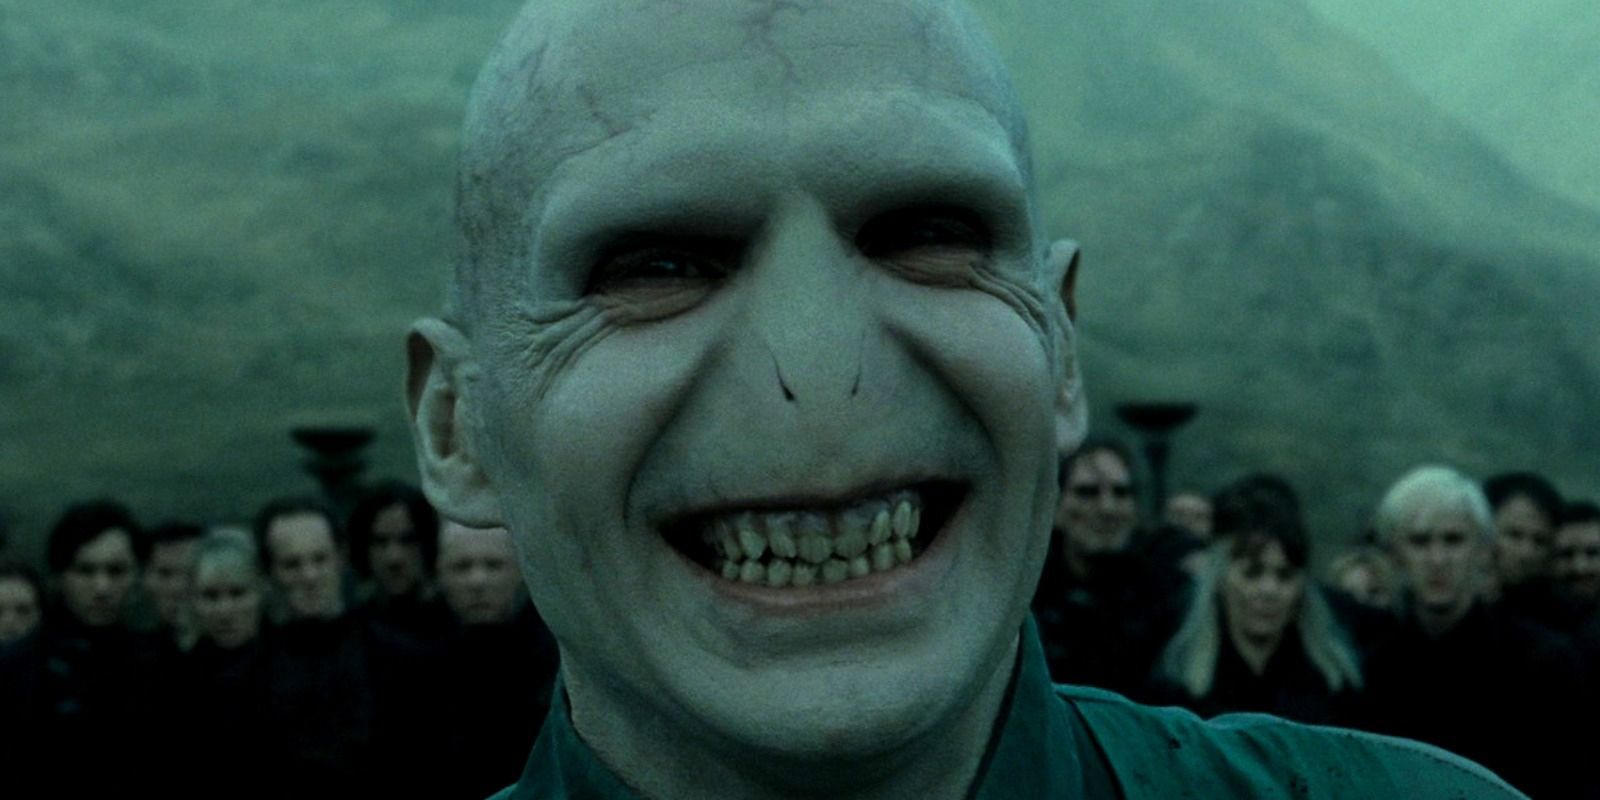 An image of Voldemort smiling in the film adaptation of Harry Potter